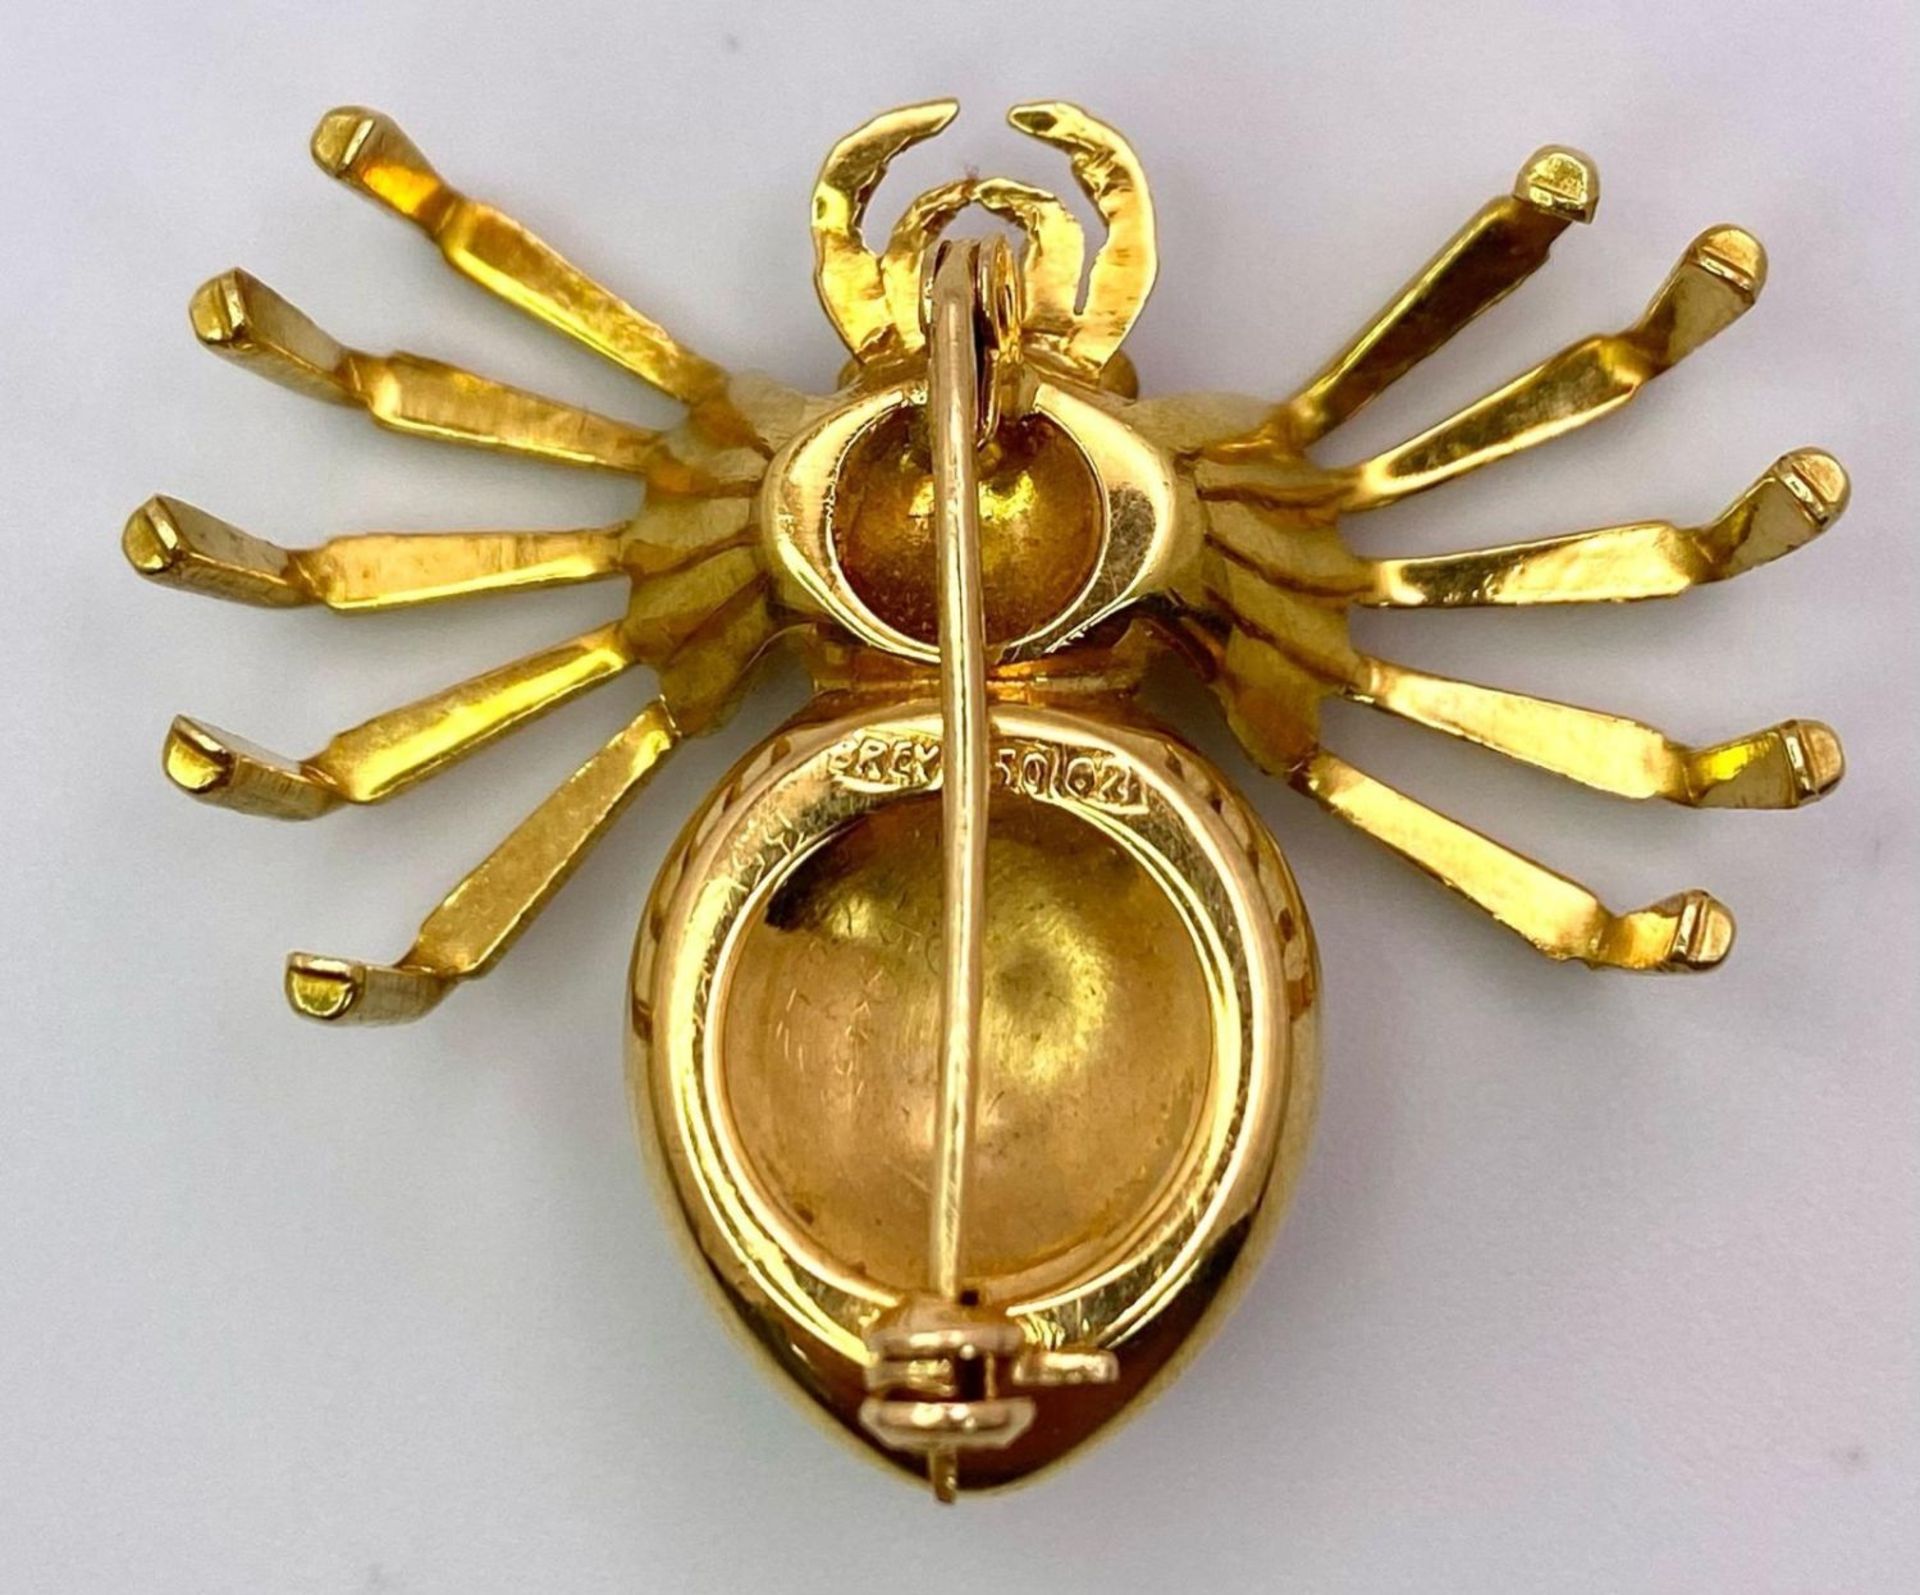 The Richest Spider in the World! 18K Yellow Gold, Sapphires and Rubies Create a Brooch/Pendant - Image 4 of 6